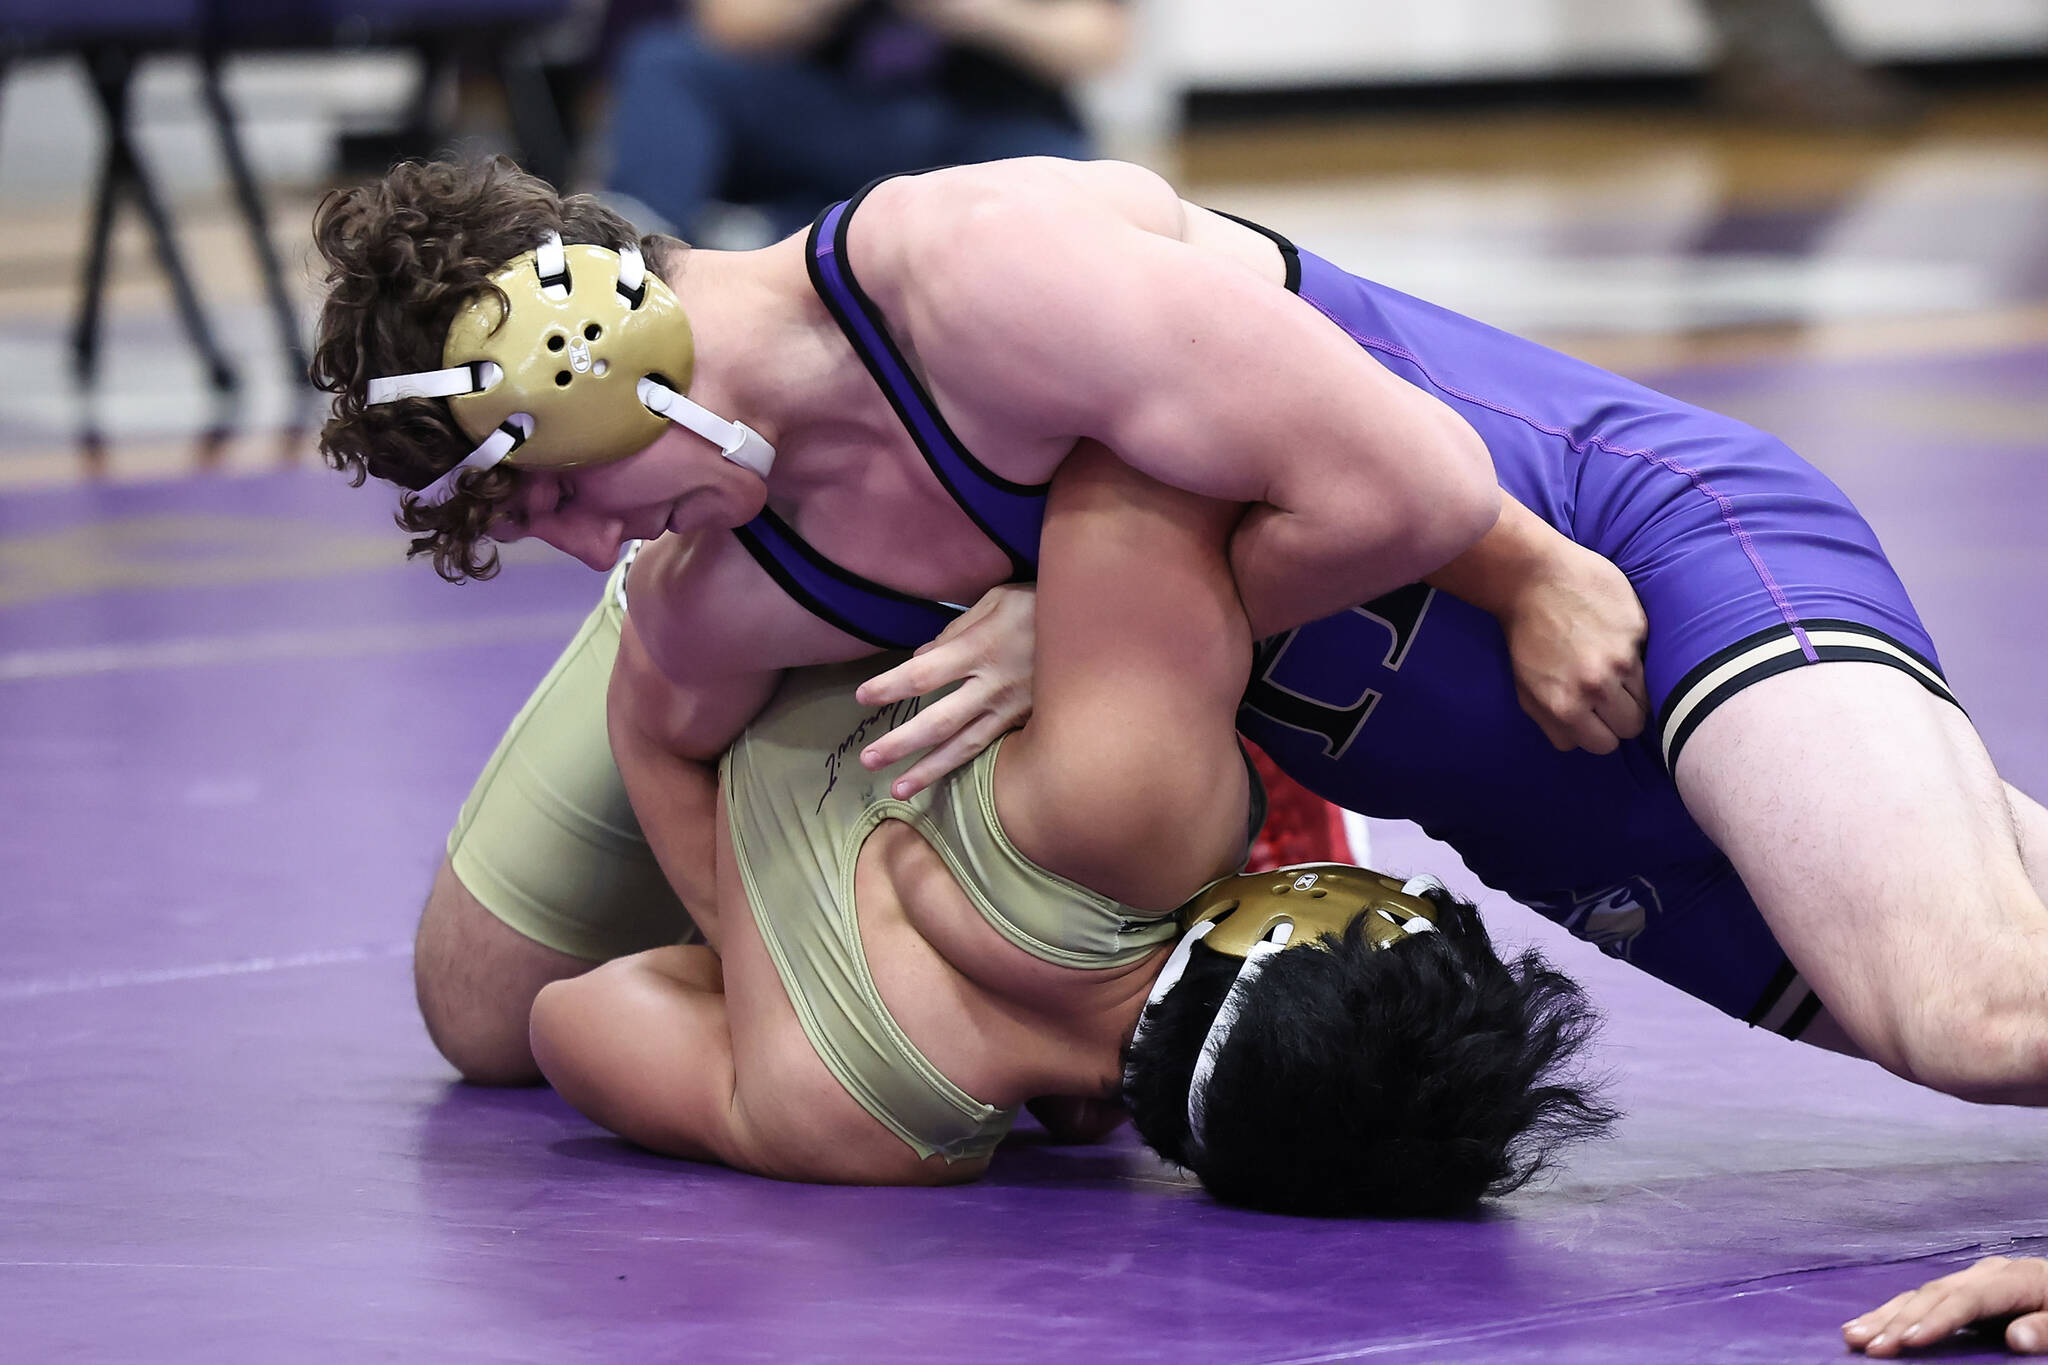 Oak Harbor wrestlers junior Ronnie Grabner competes against Tony Valle during the Purple and Gold event. (Photo by John Fisken)